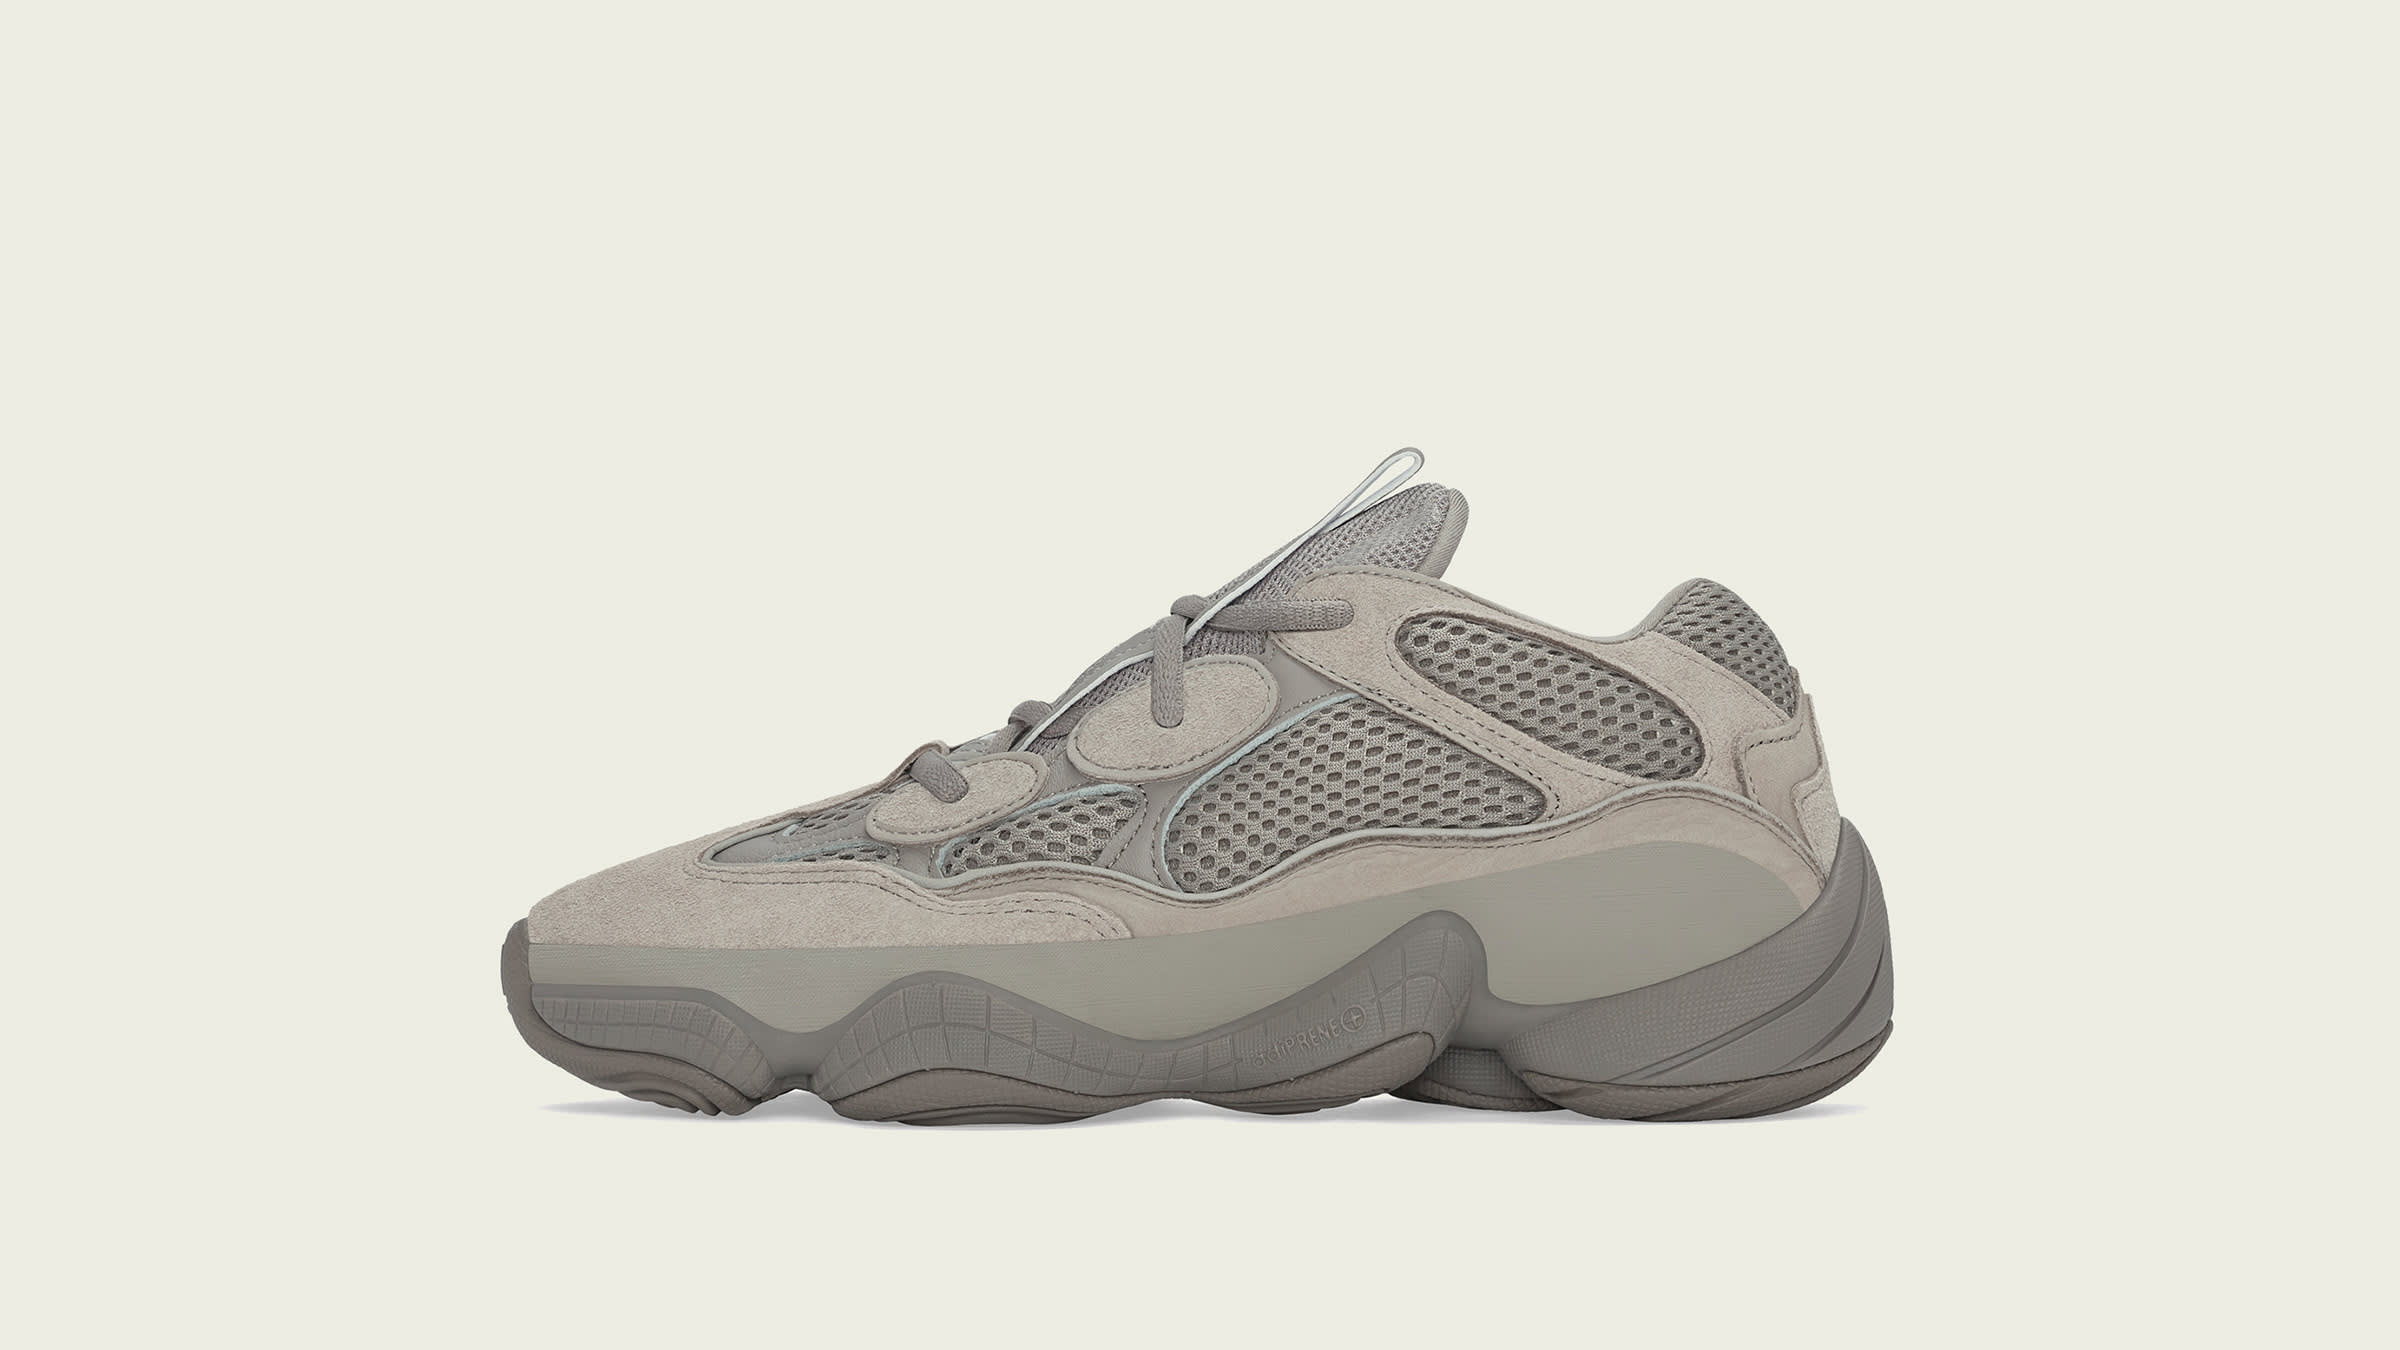 Yeezy 500 (Ash Grey) | END. Launches